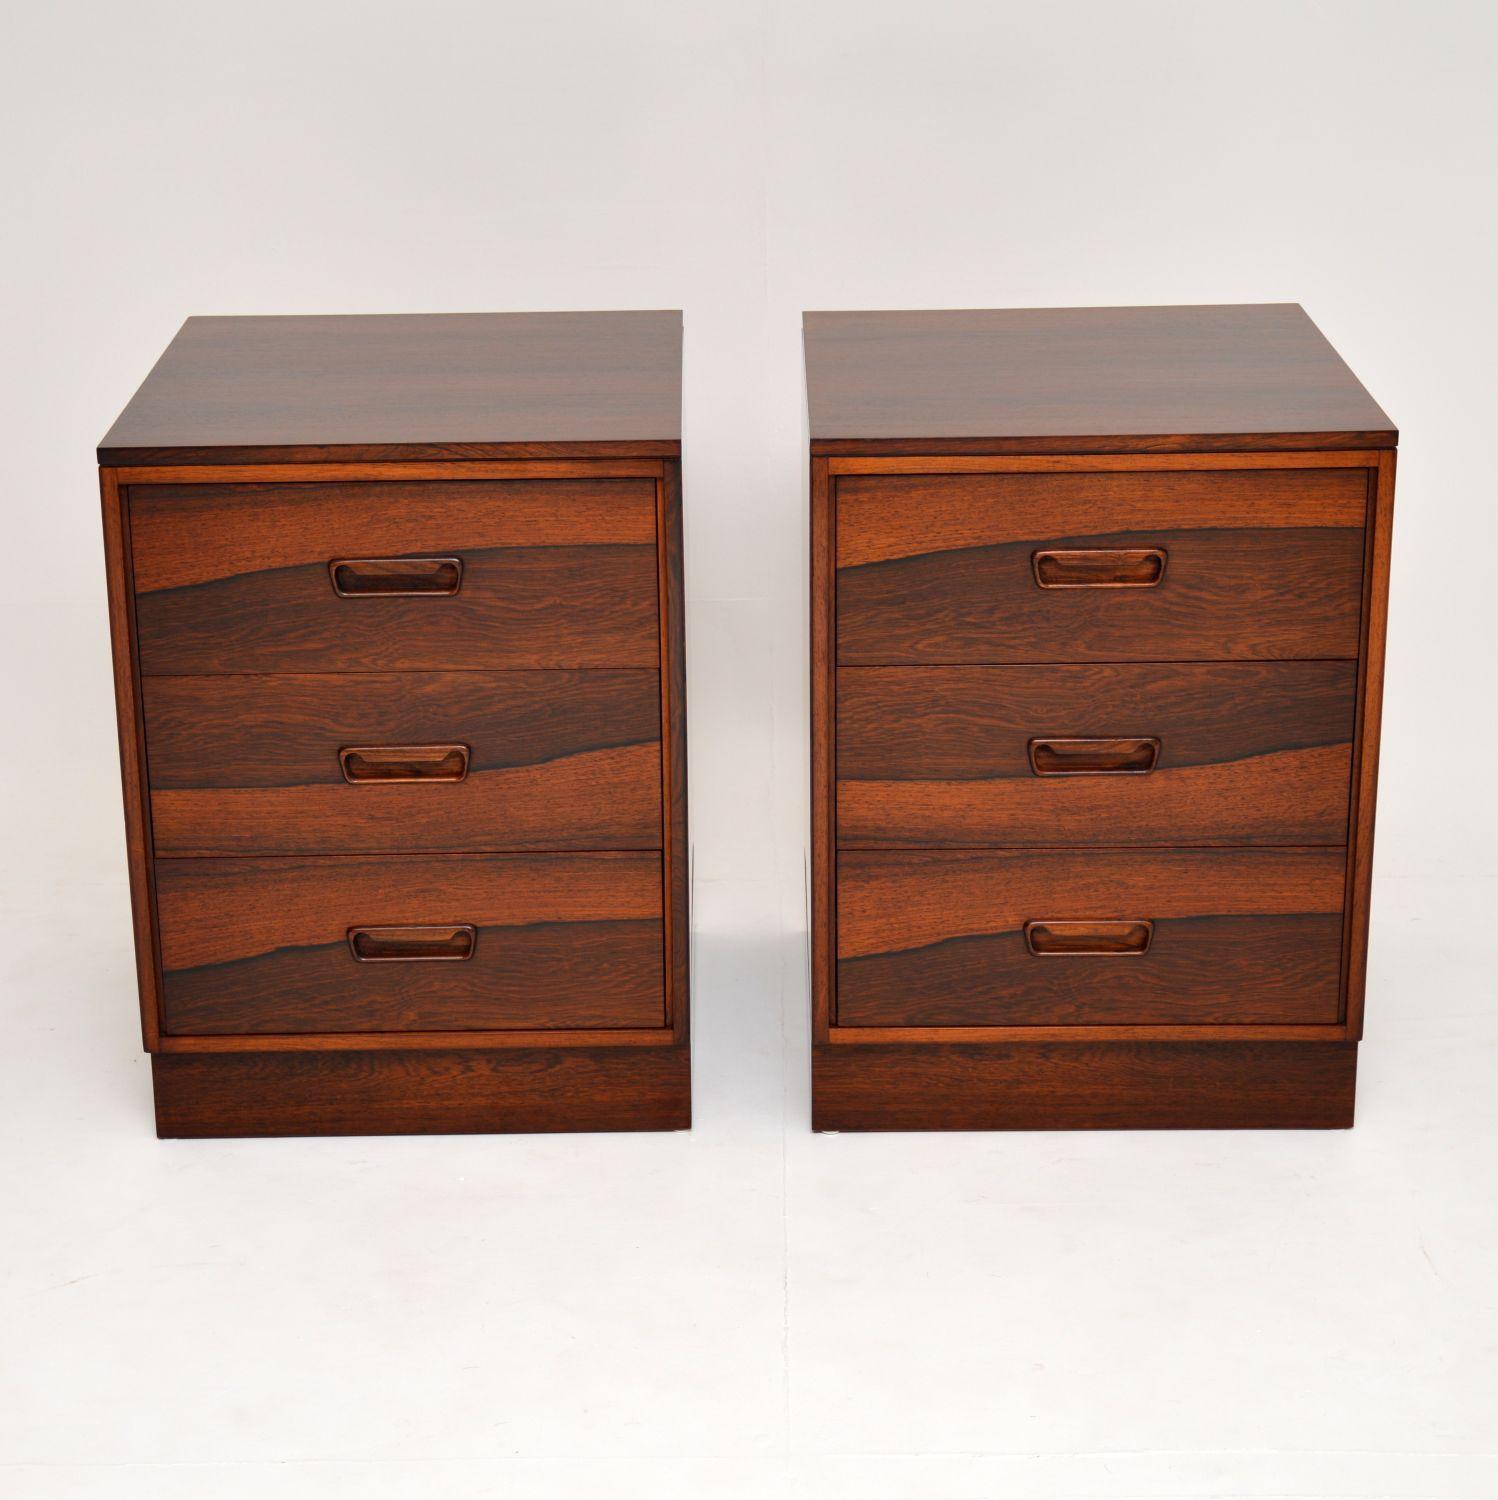 A stunning and extremely well made pair of Danish wood bedside chests. Dating from the 1960s, these are a great size, with lots of storage space in the drawers. The quality is exceptional, they are of a very solid build. We have had these fully